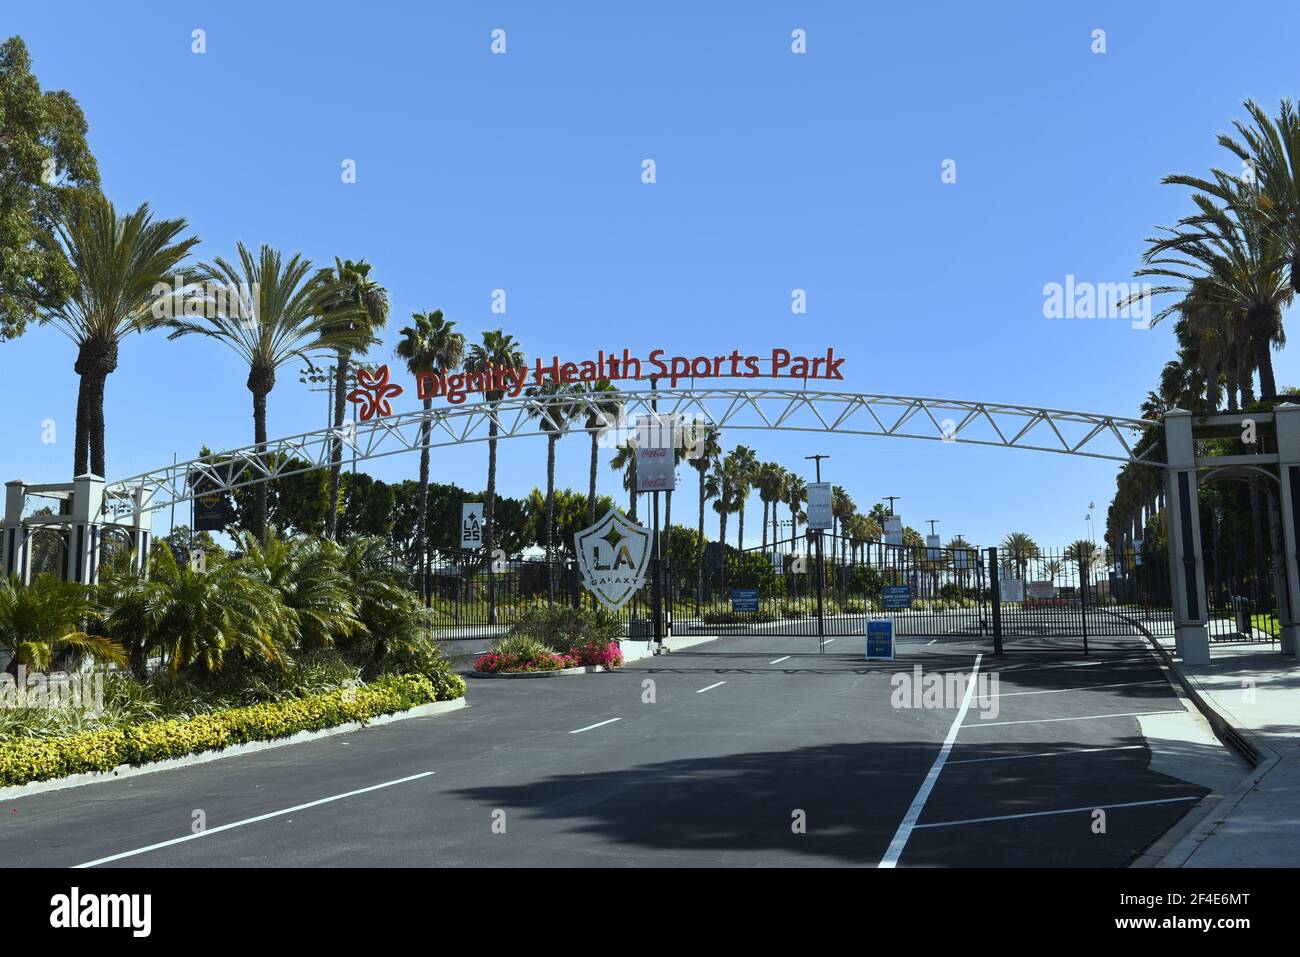 CARSON, CALIFORNIA - 20 MAR 2021: Avalon Boulevard entrance to Dignity Health Sports Park, on the campus of Cal State Dominguez Hills, home to the LA Stock Photo